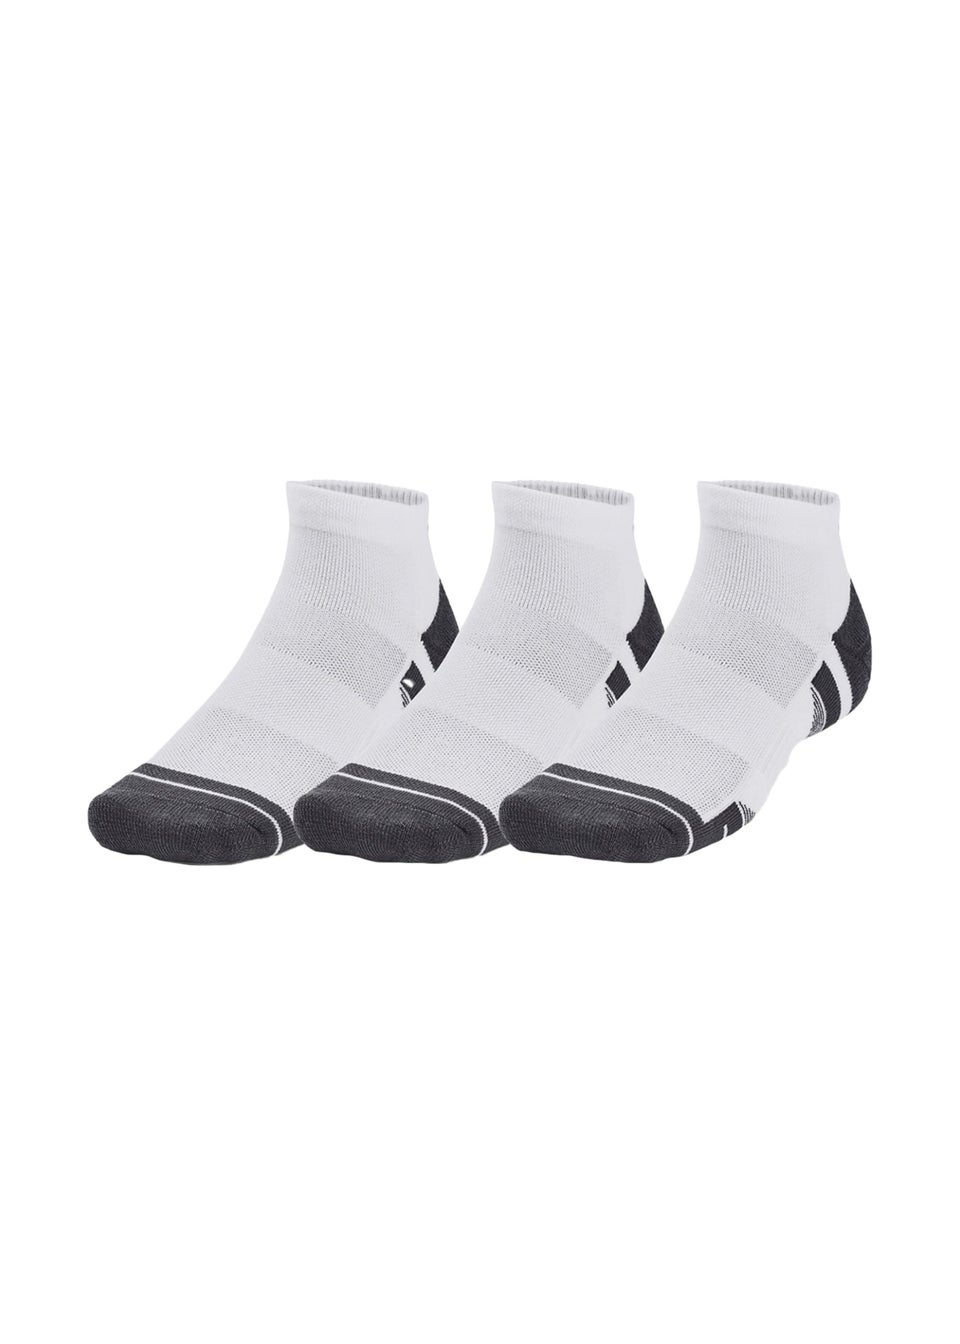 Under Armour White Performance Tech Socks (Pack of 3)